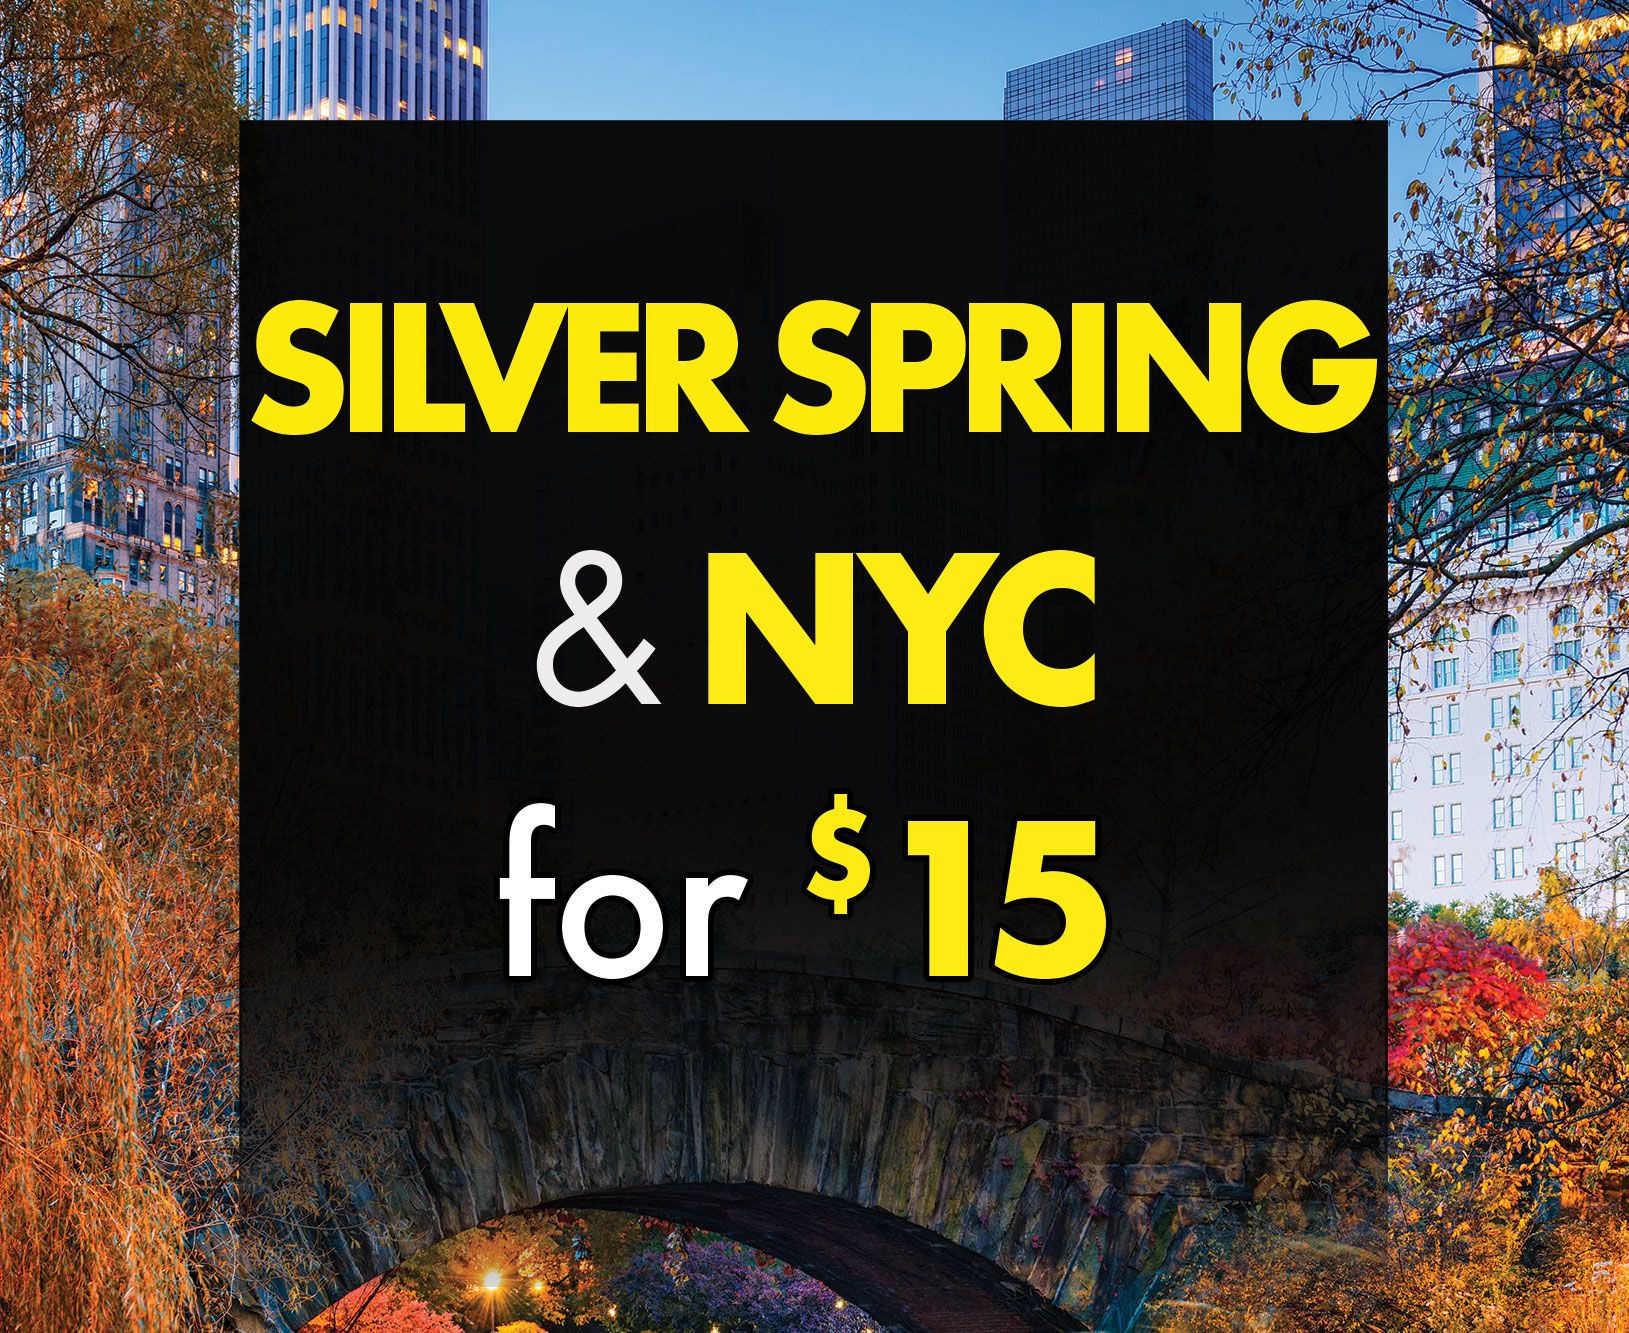 Express Service between Silver Spring, MD & New York City for $15